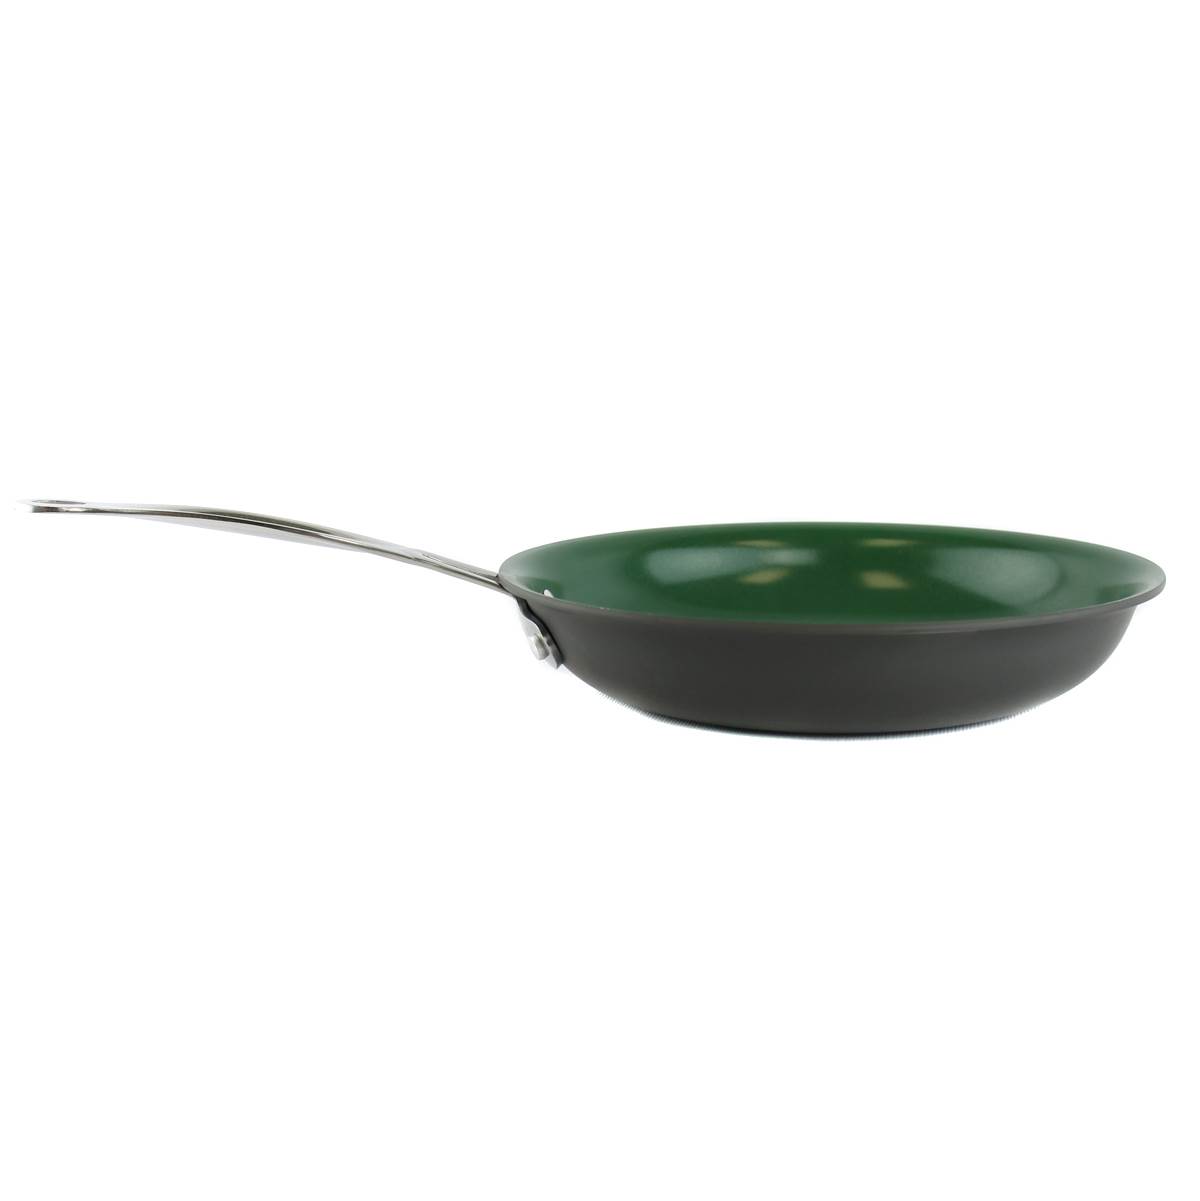 As Seen on TV 12" OrGREENic Porcelain Ceramic Cooking Fry Pan with Helper Handle - image 1 of 4